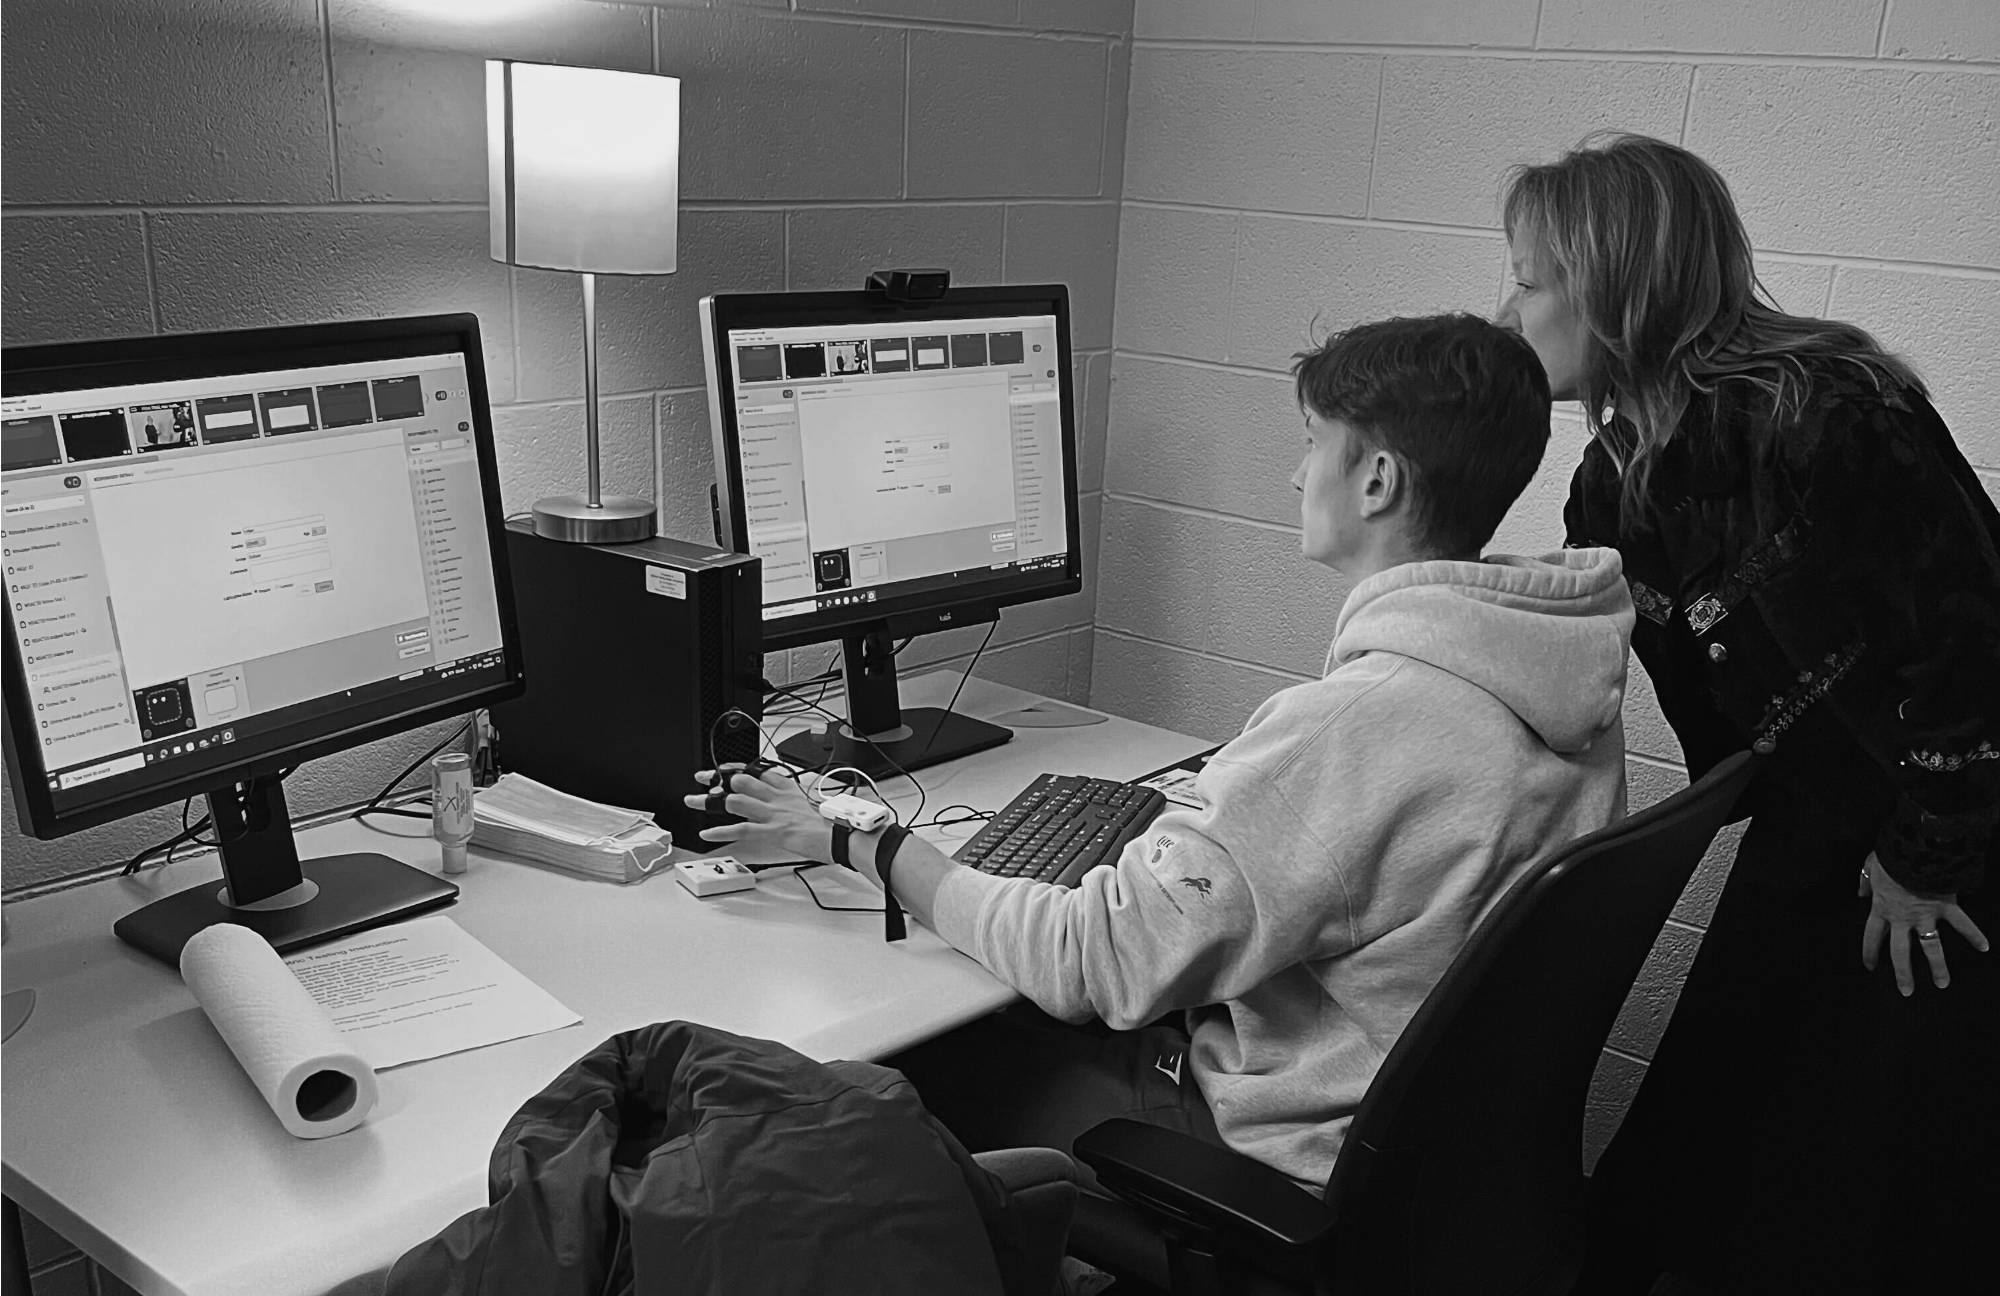 Student and teacher working on a computer together